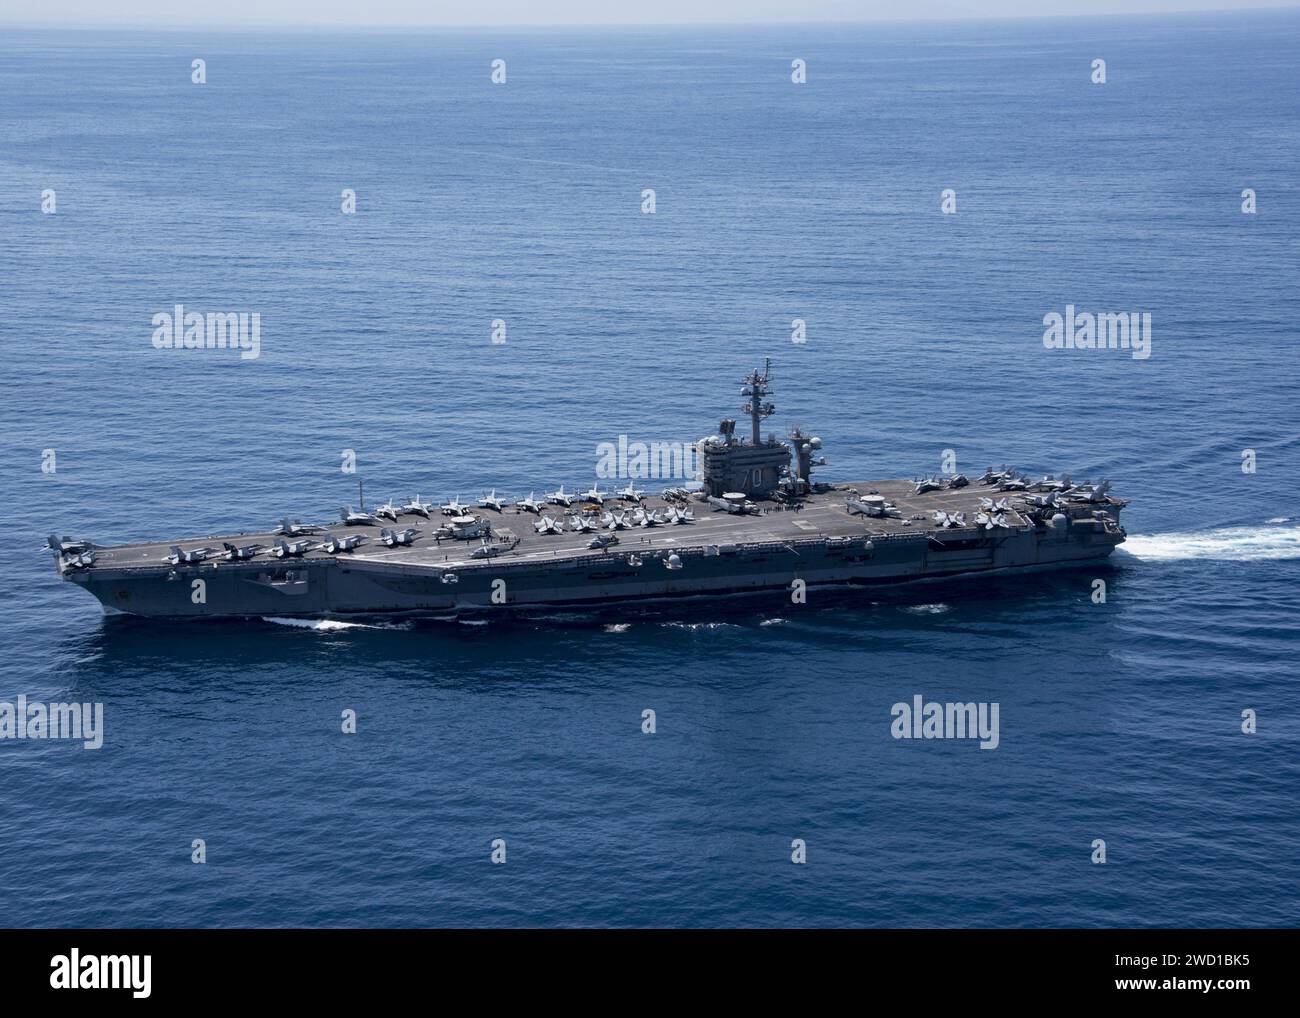 The aircraft carrier USS Carl Vinson (CVN 70) transits the Indian Ocean. Stock Photo